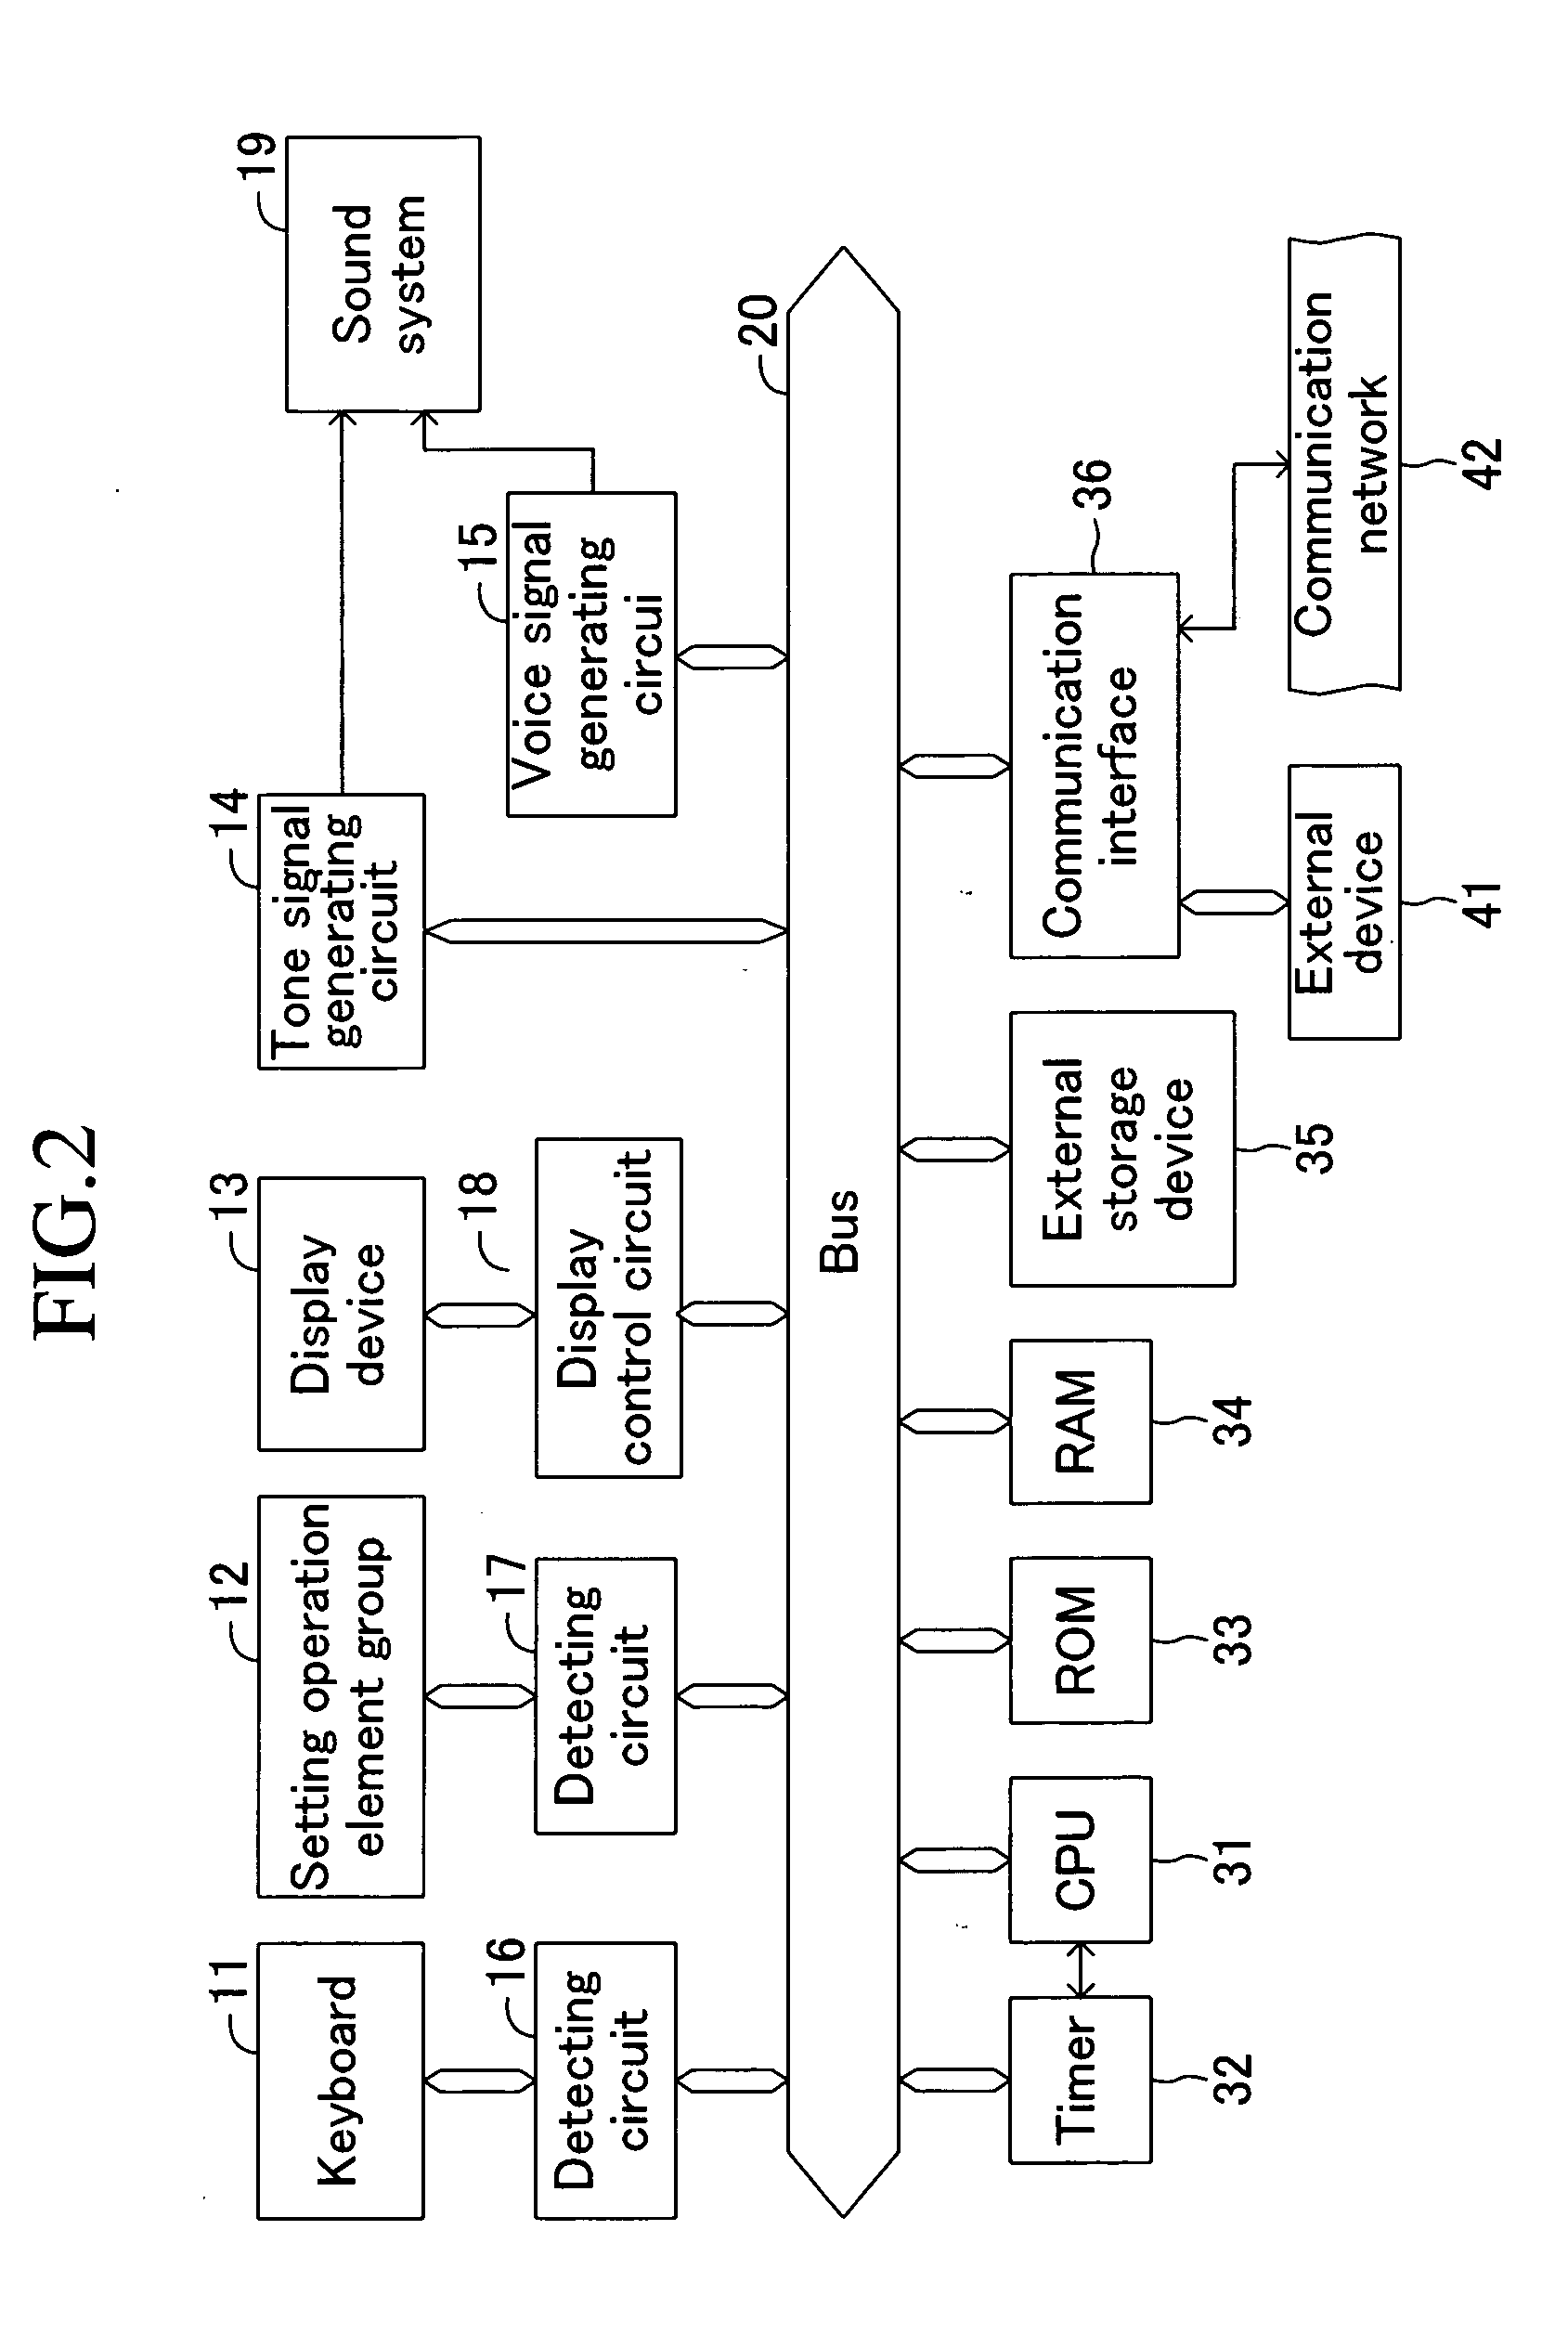 Apparatus and computer program for practicing musical instrument